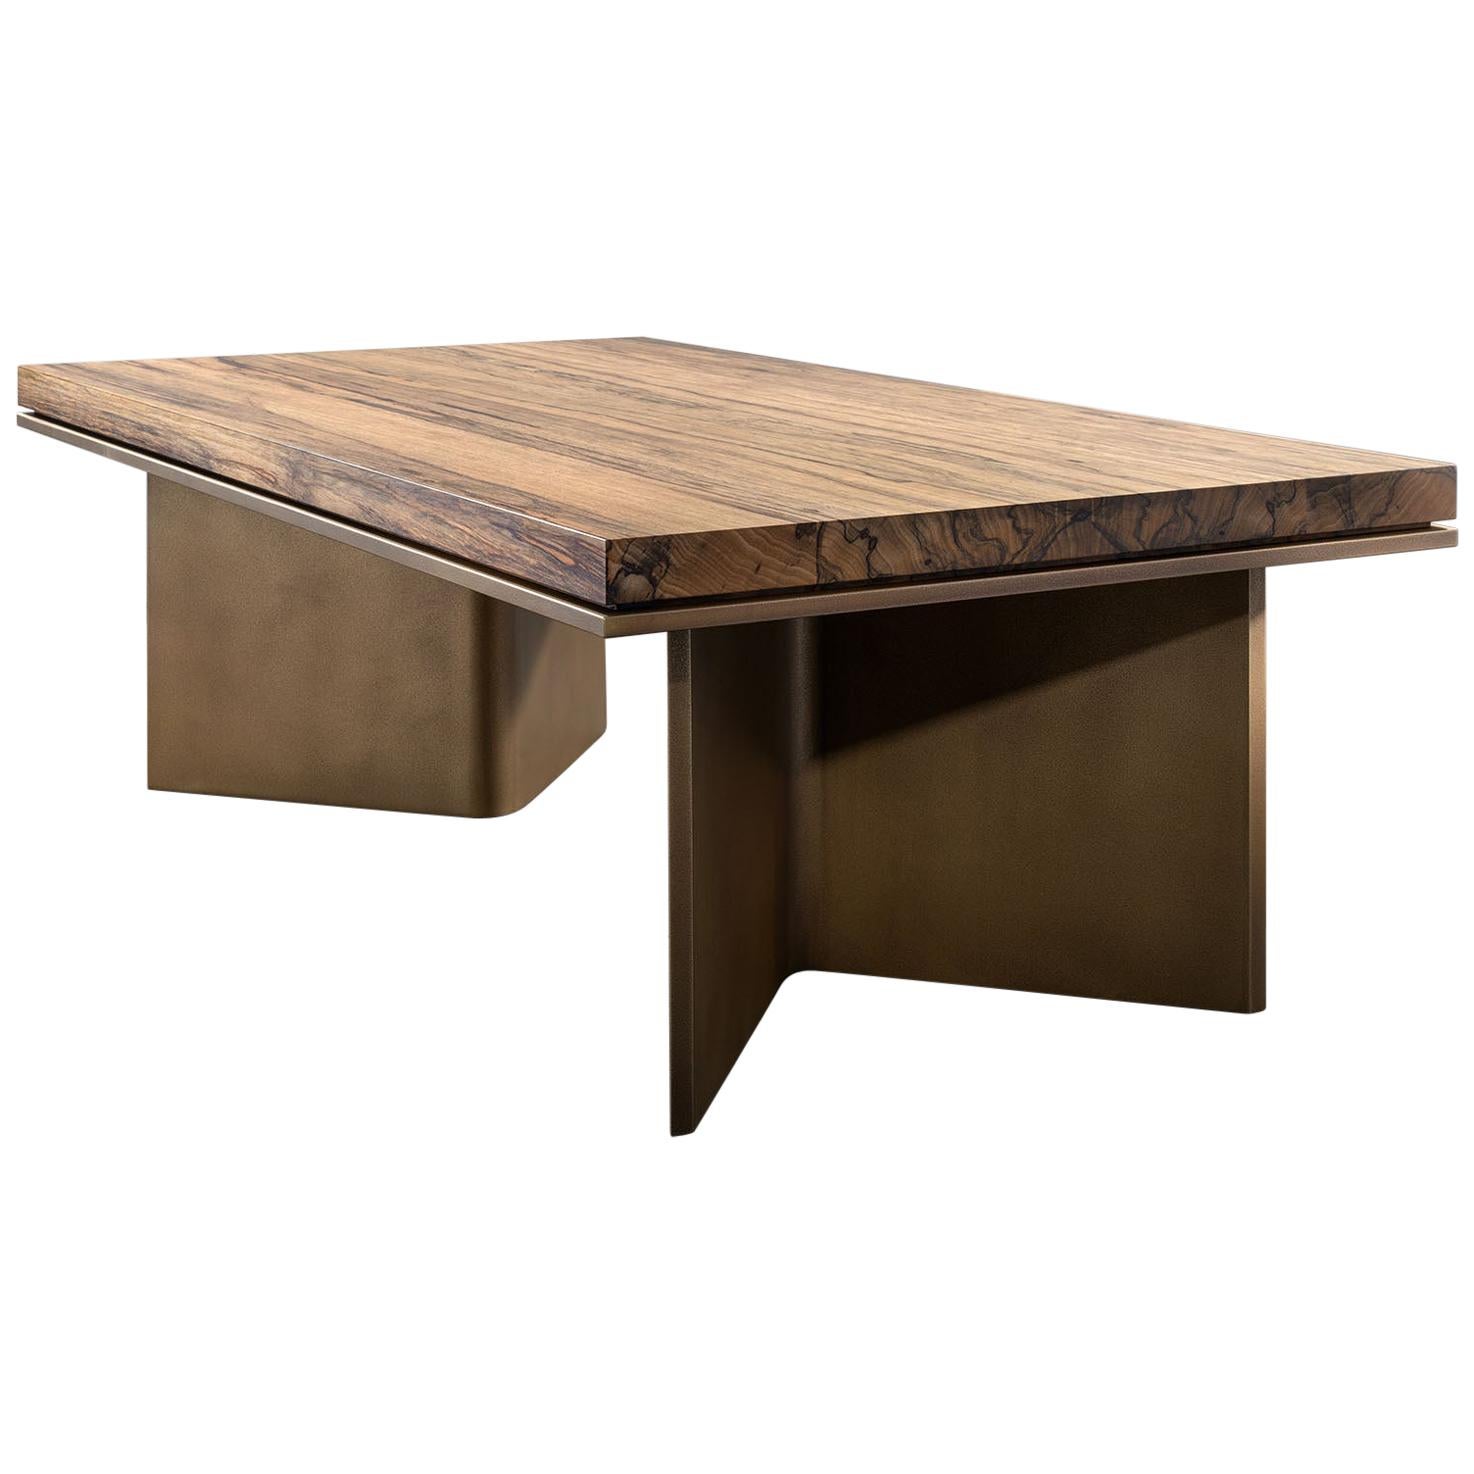 LUMA Design Workshop "V" Coffee Table in Bronze Texture Metal and Light Hardwood For Sale